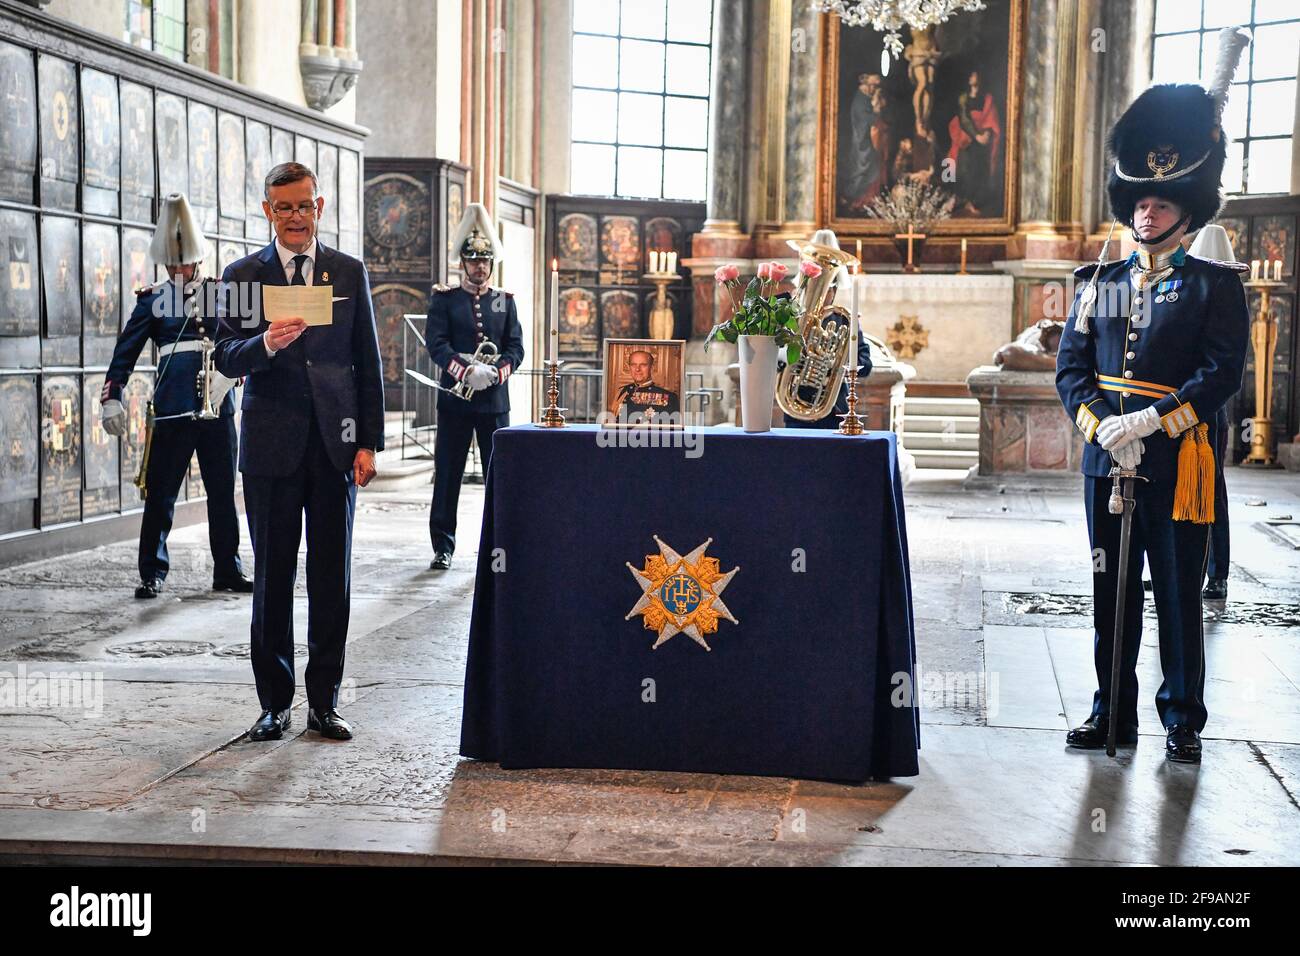 Britain's late Prince Philip, Duke of Edinburgh, is honured during a  ceremony held at the Riddarholmen Church in Stockholm, Sweden, on April 17,  2021. Prince Philip's Royal Order of the Seraphim shield